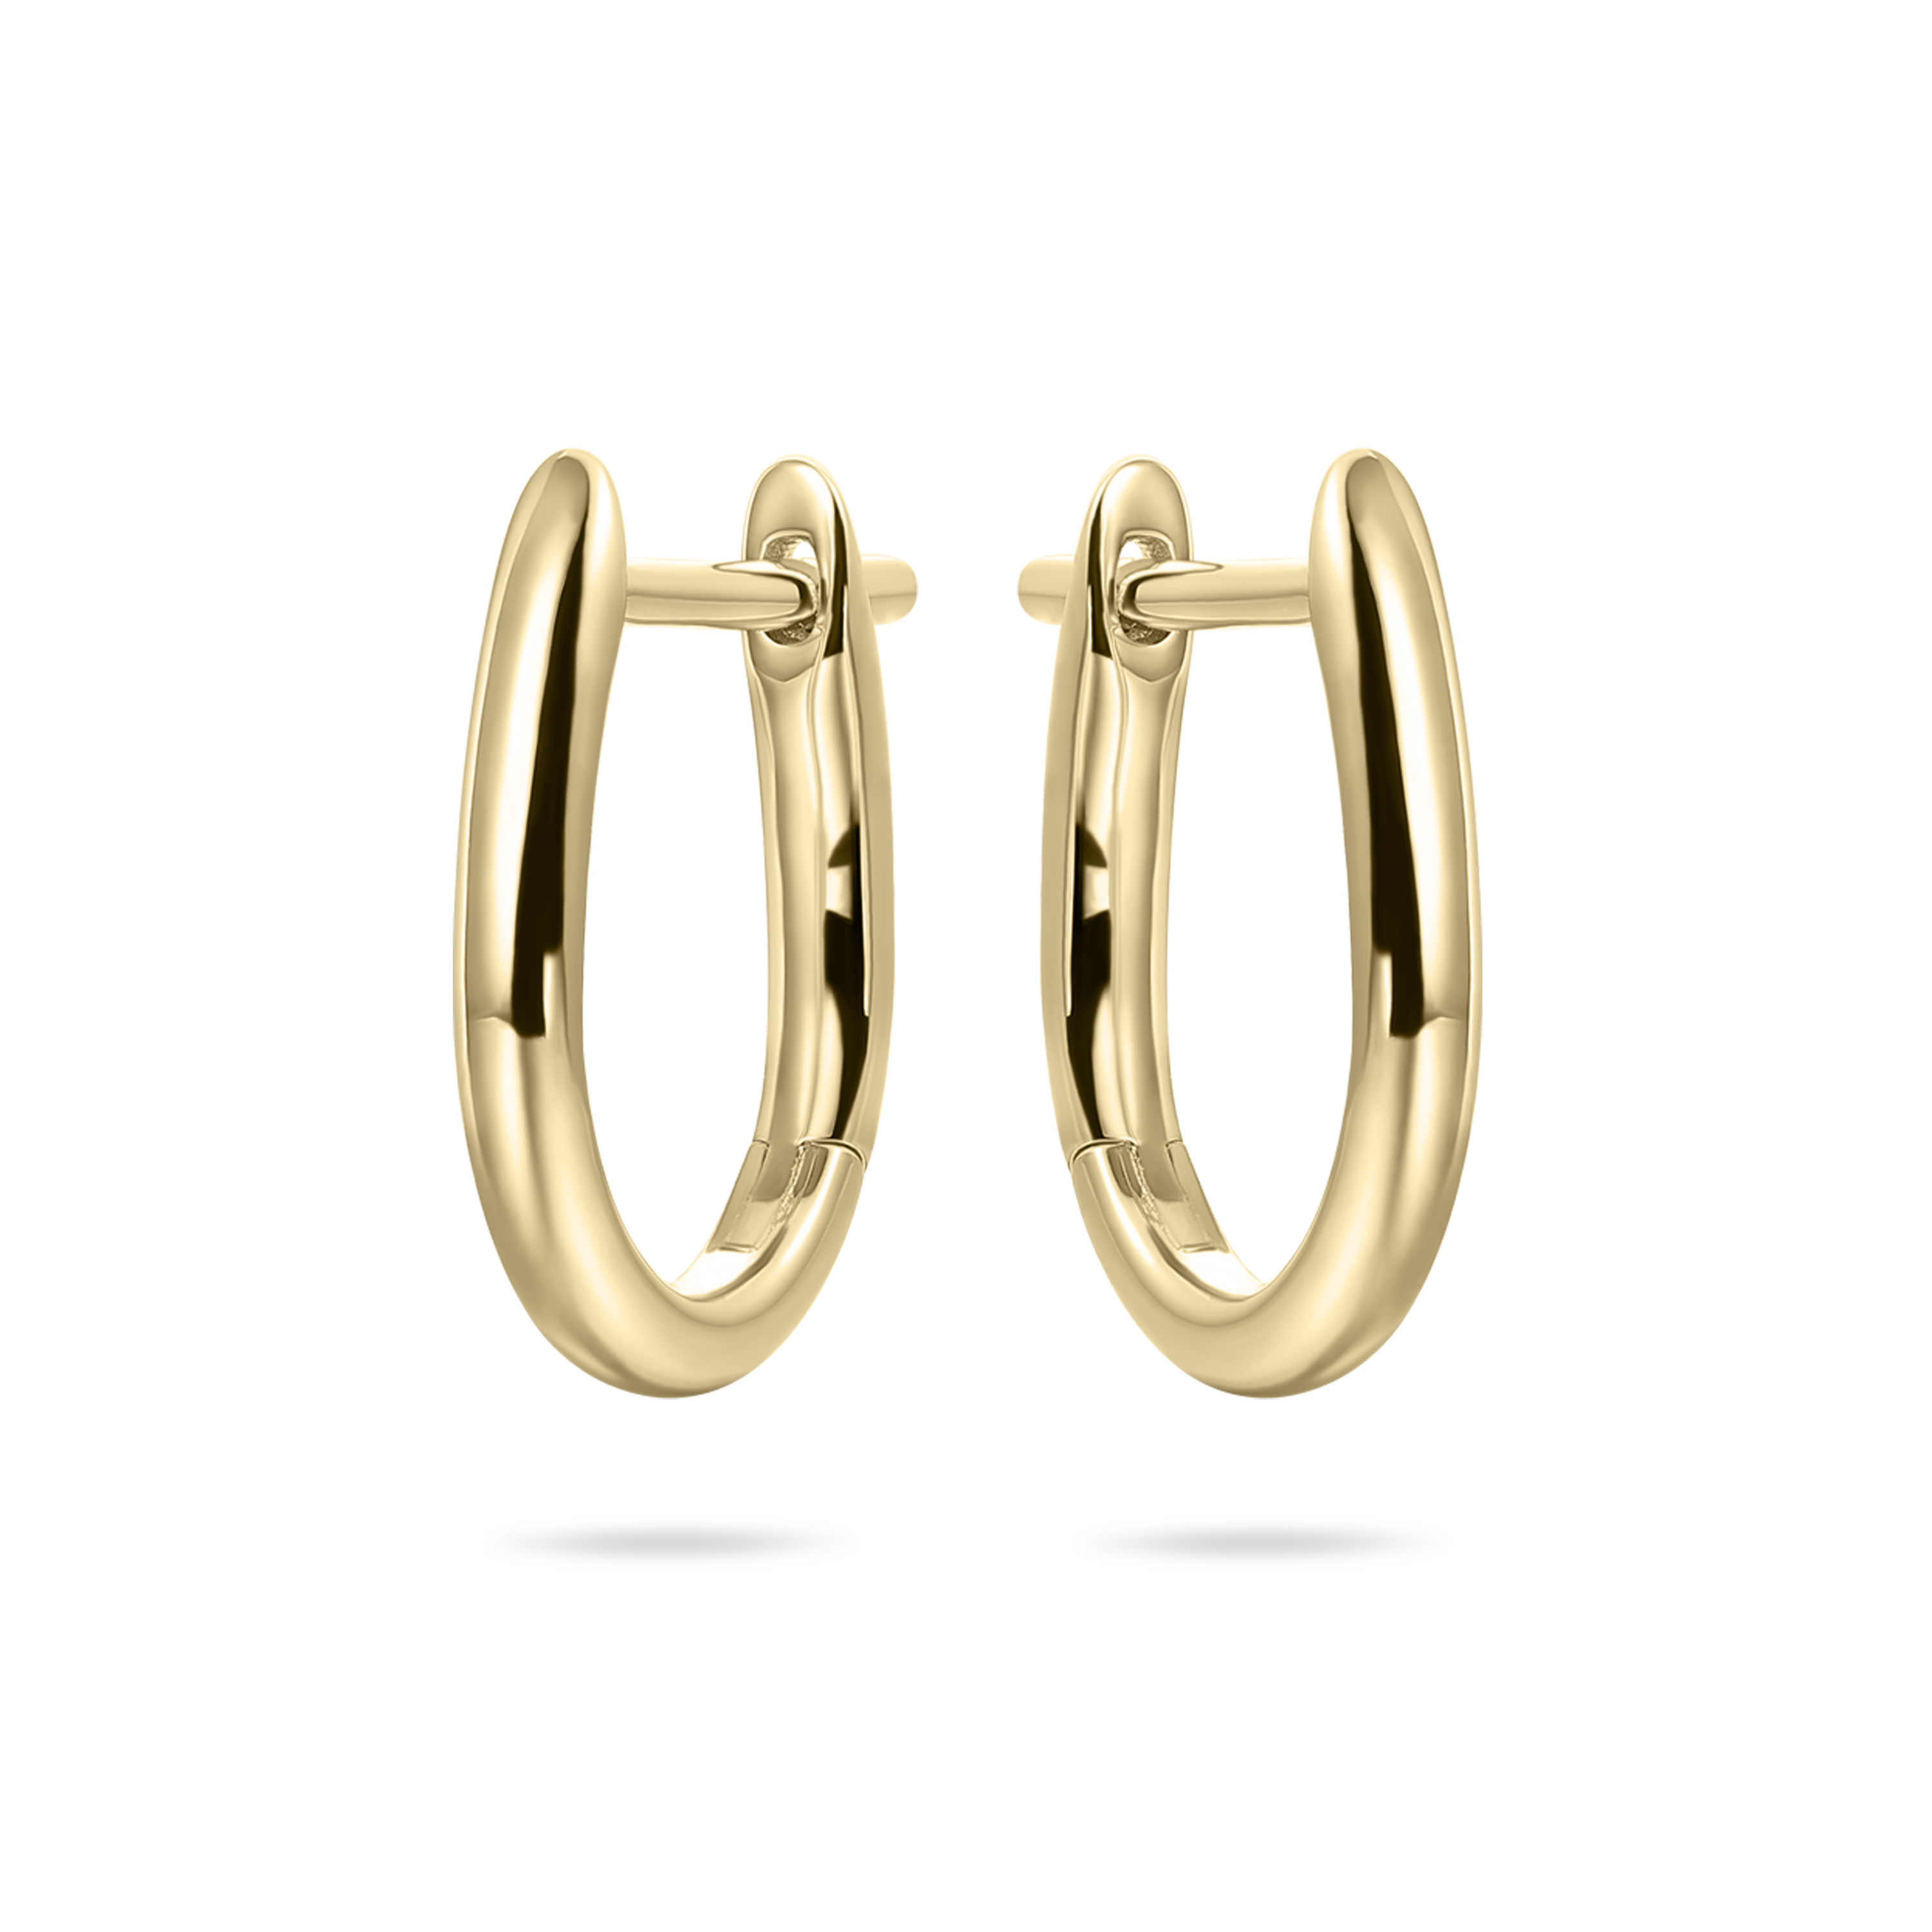 Gisser Jewels Silver Gold Plated Polished Oval Hoop Earrings